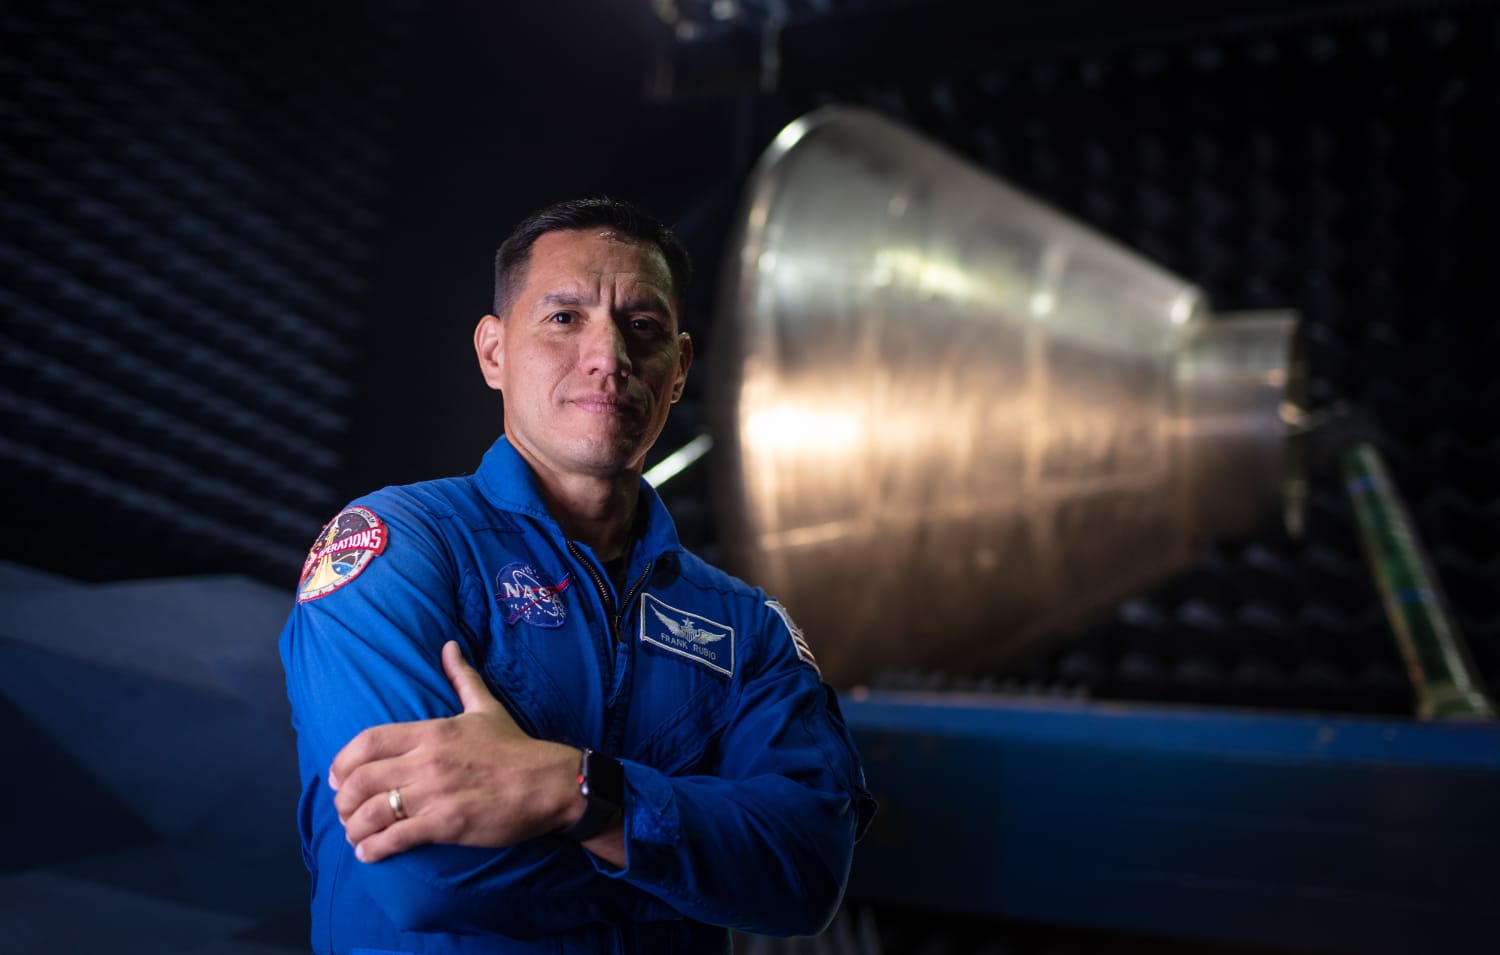 Frank Rubio: From Pilot to Doctor to Astronaut